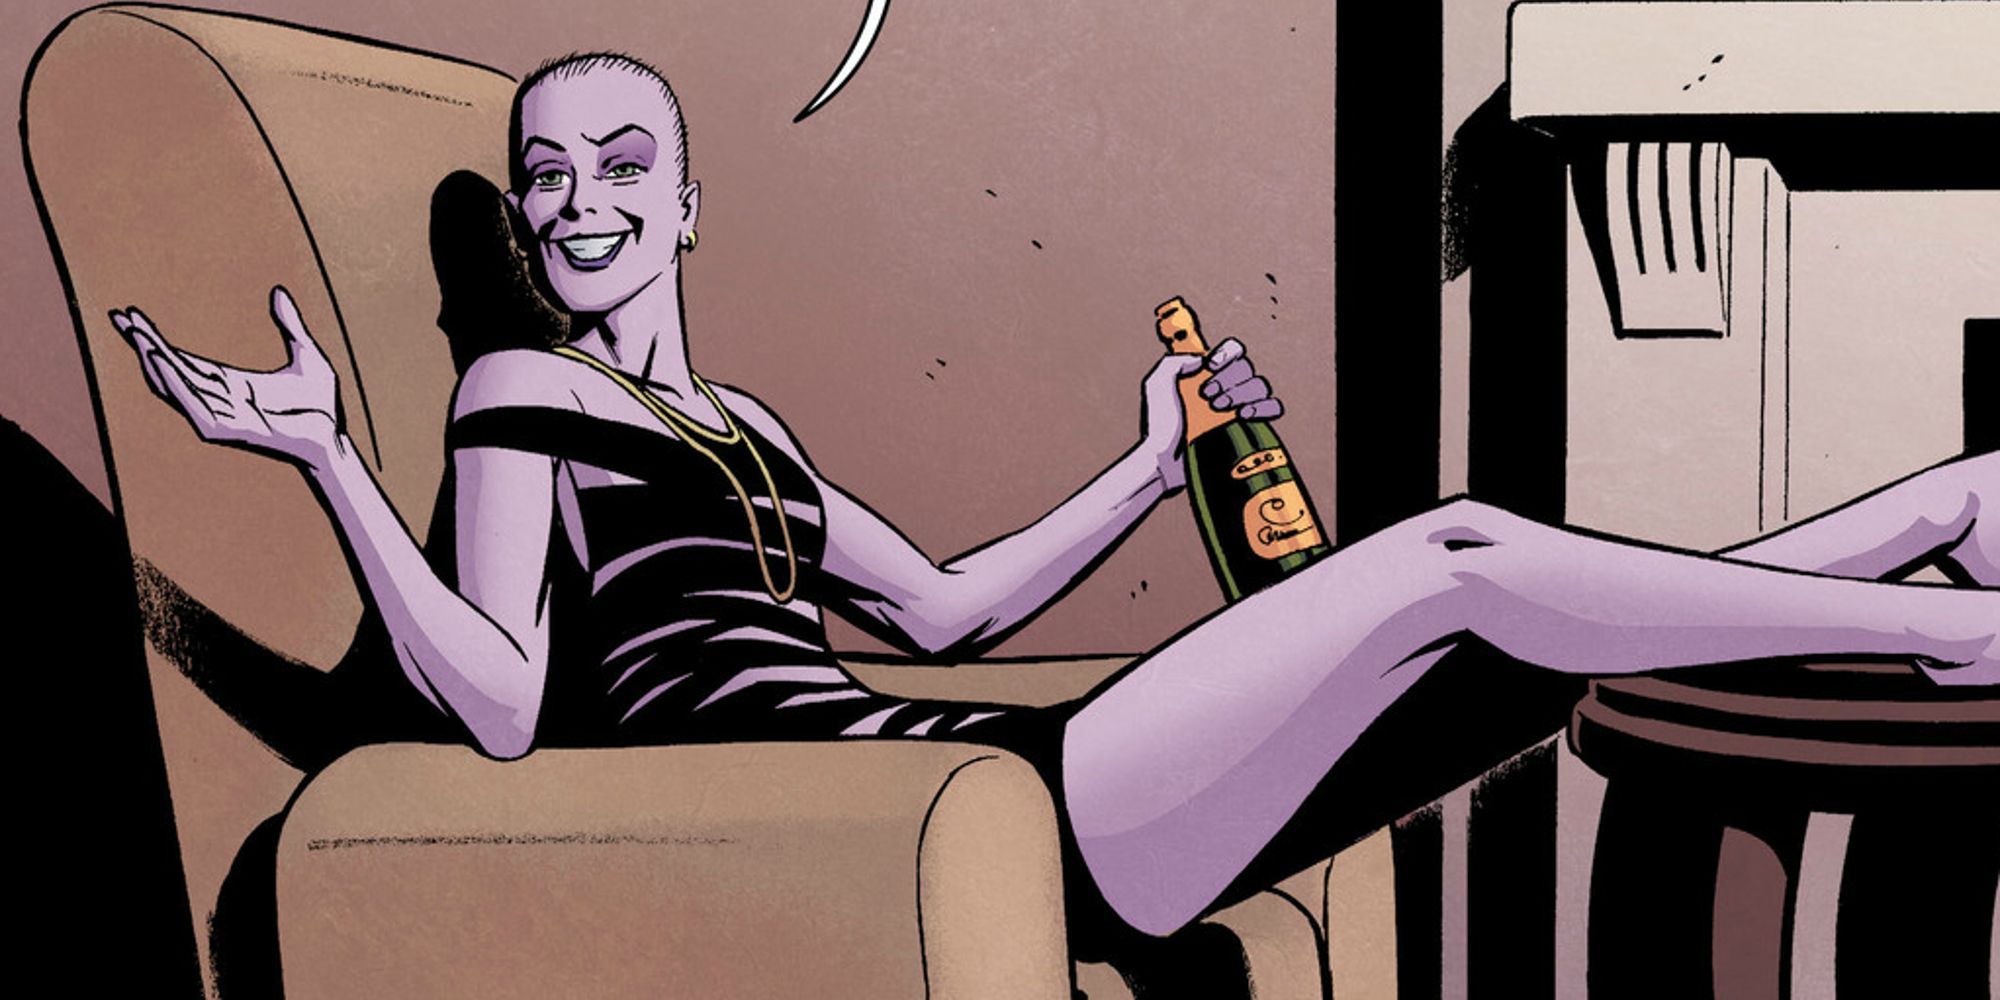 Strife casually sitting on a chair in Wonder Woman #25